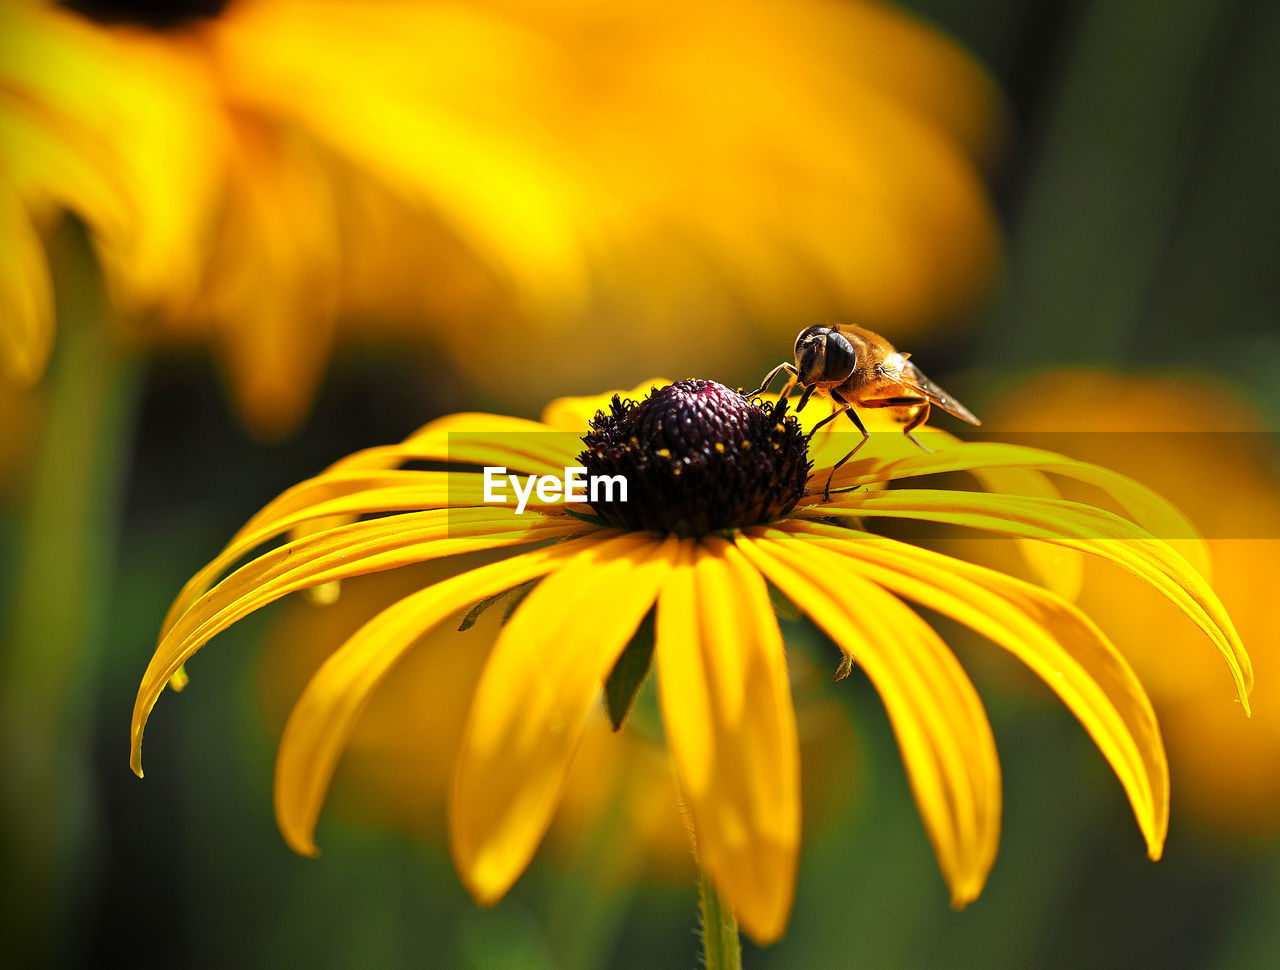 A bee on the flower of a black-eyed susan at work